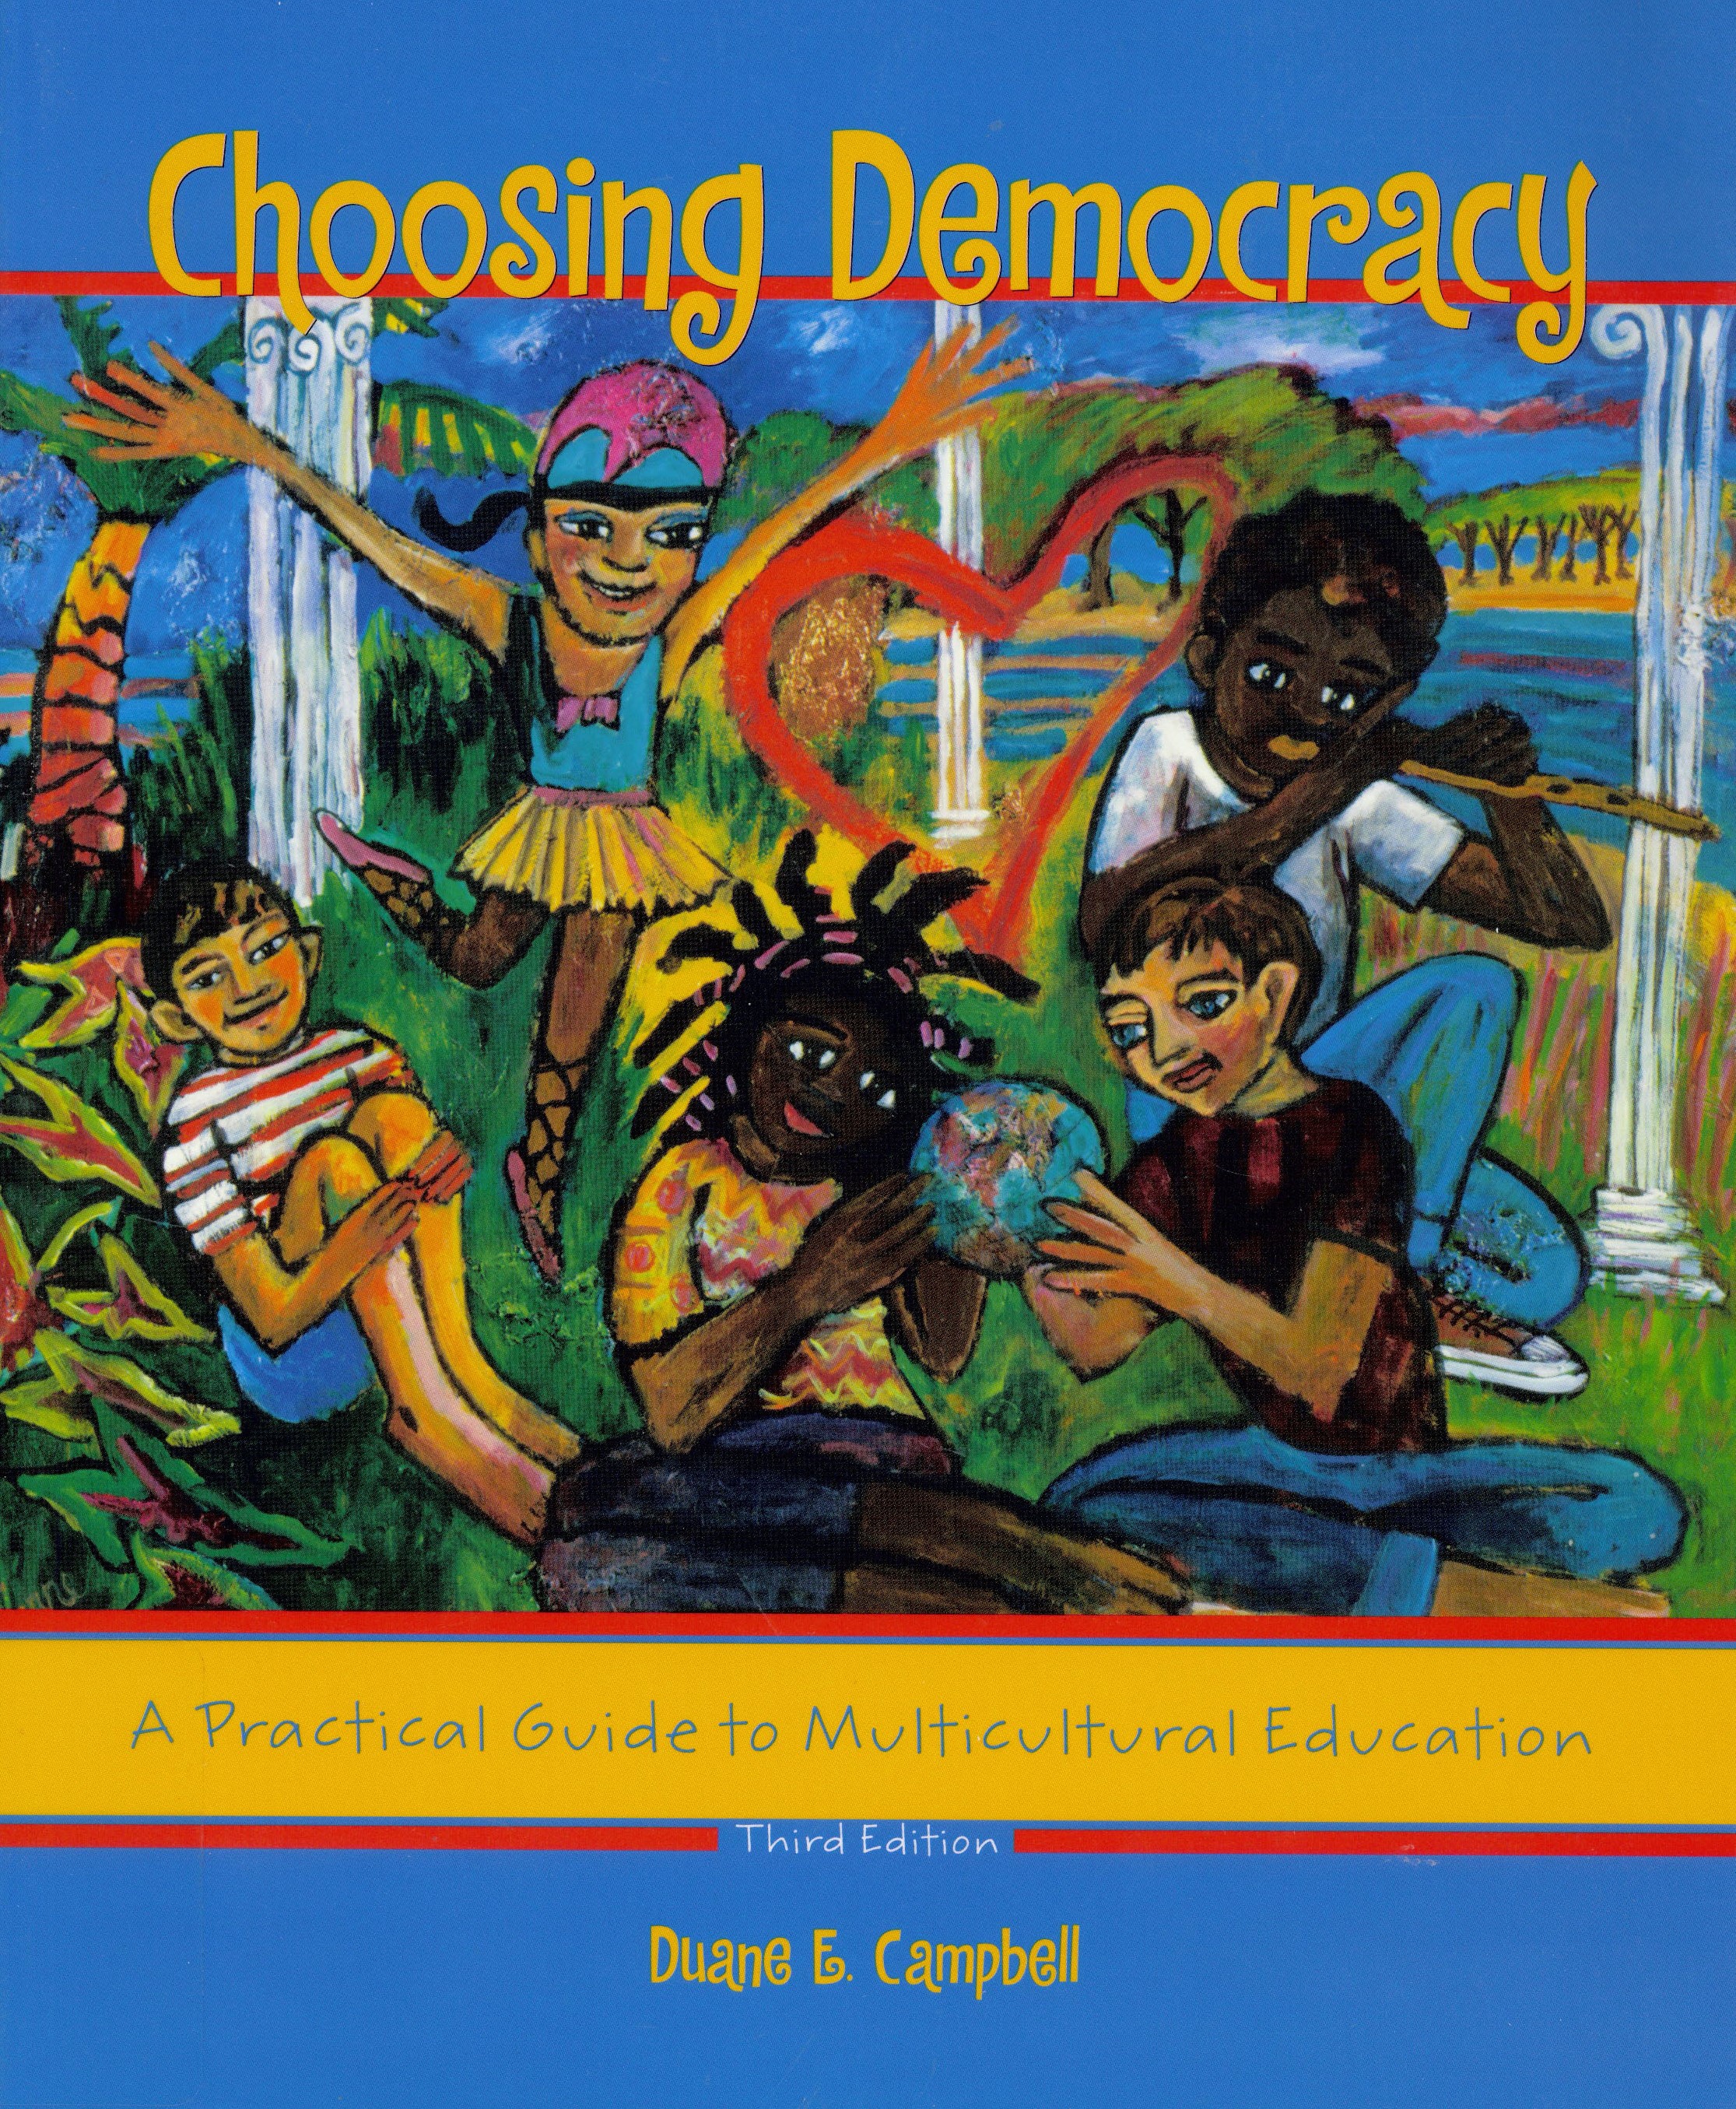 Choosing democracy : a practical guide to multicultural education